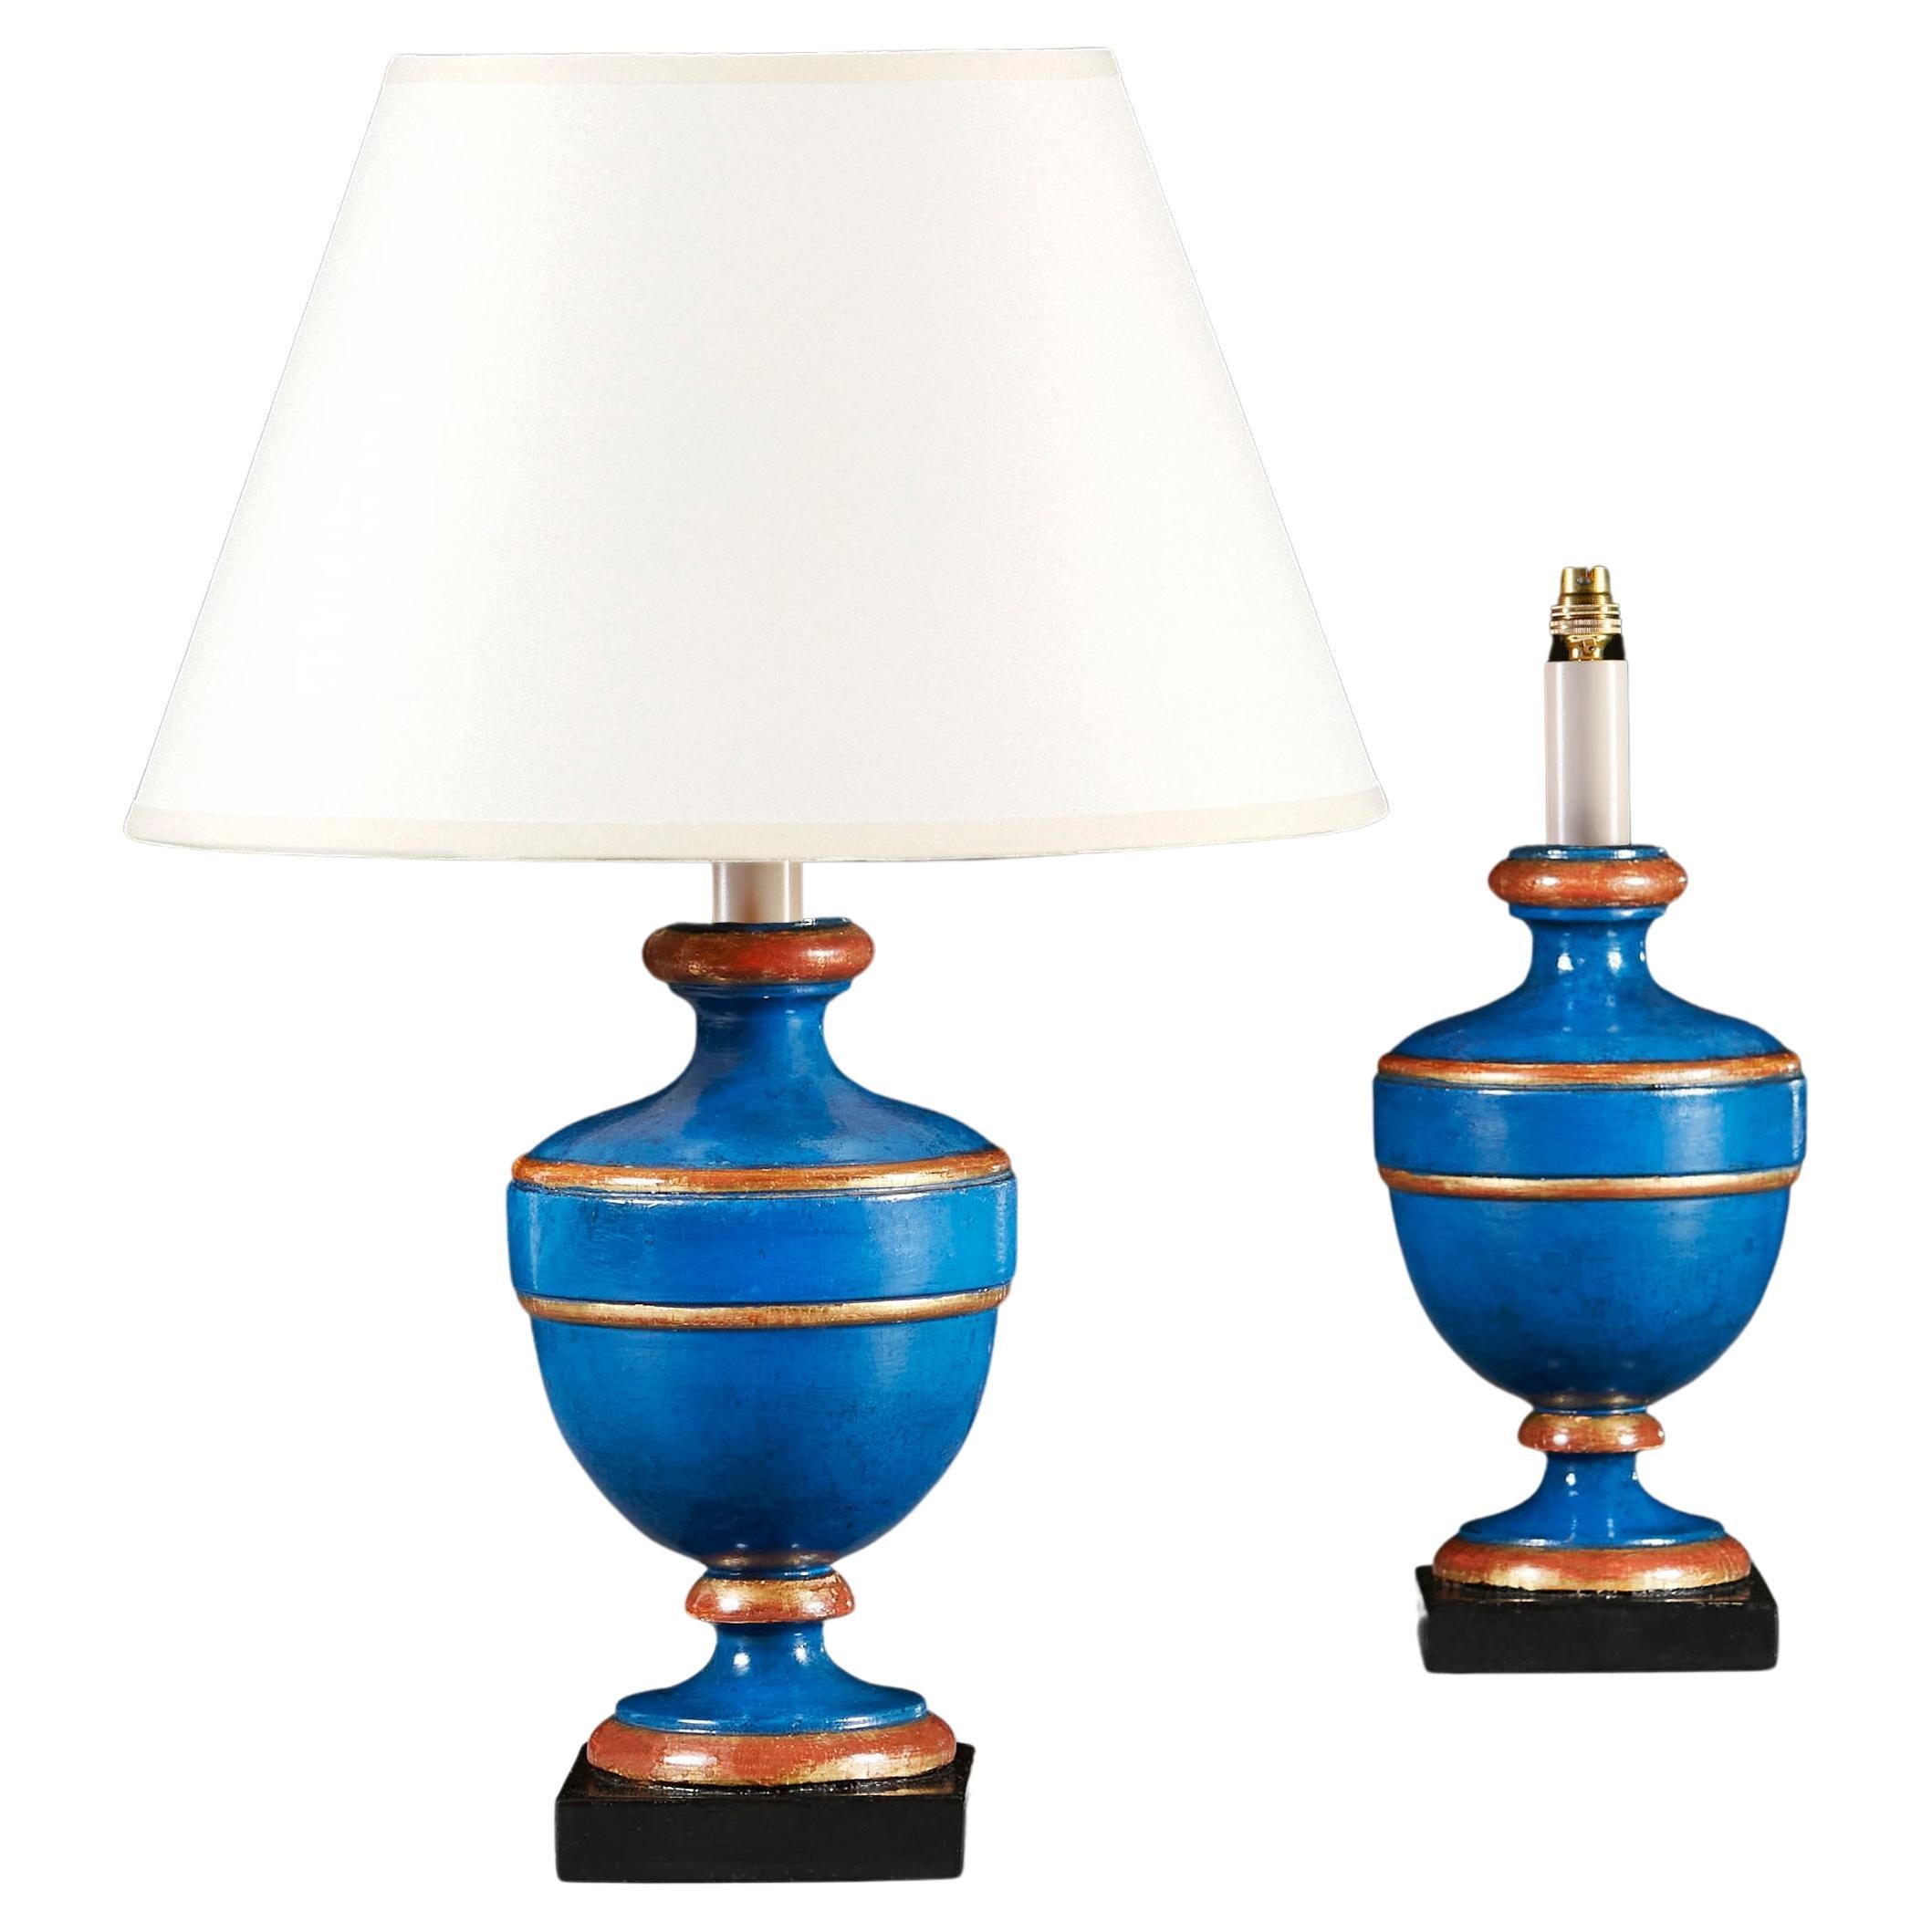 Pair of Blue Painted Candlestick Lamps